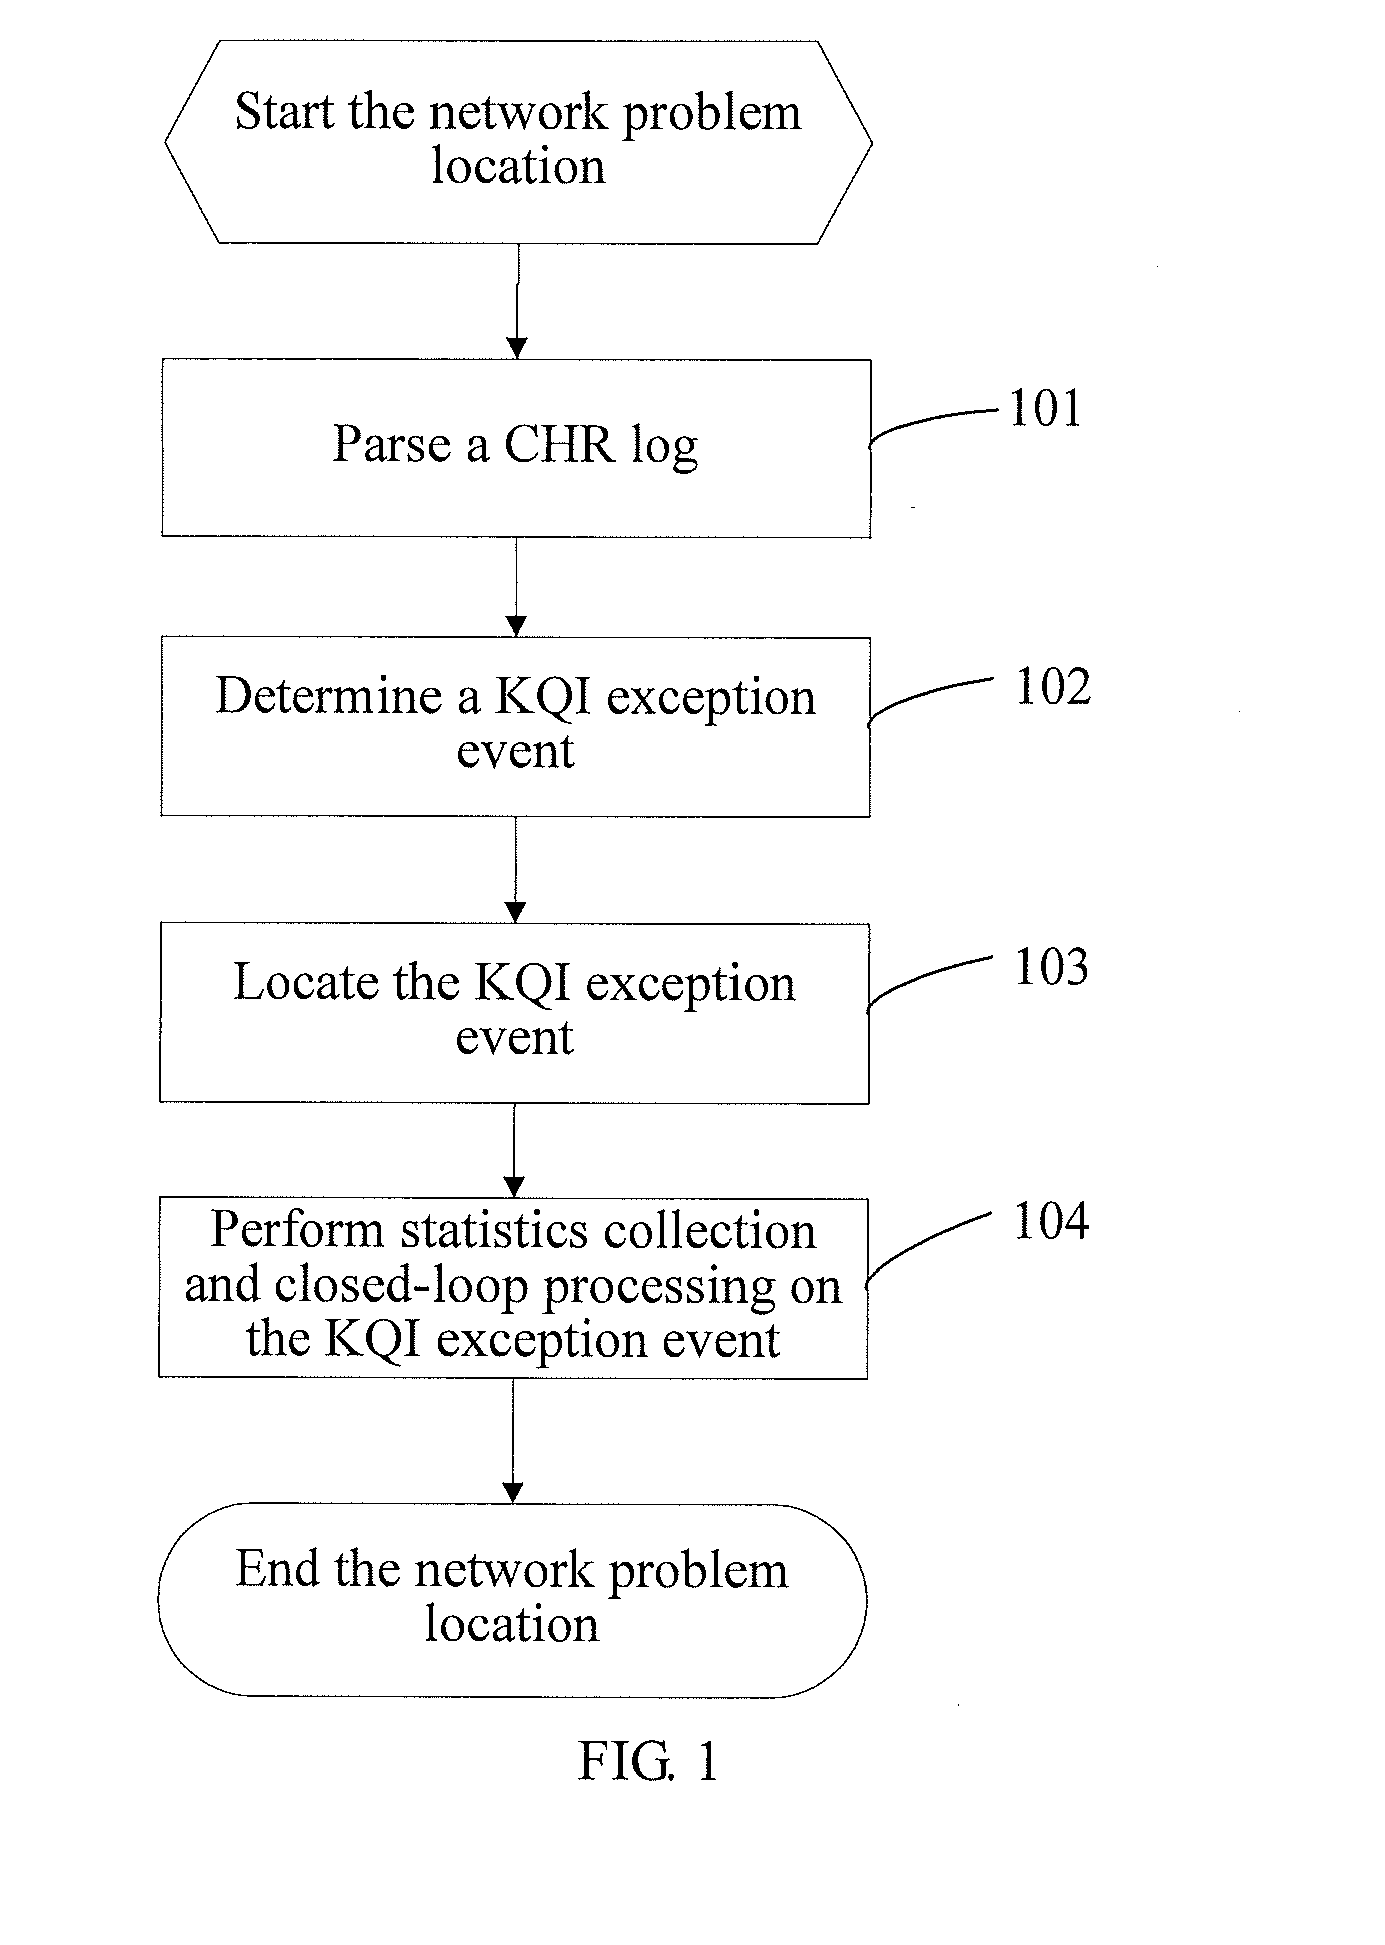 Method and apparatus for network problem location based on subscriber perception